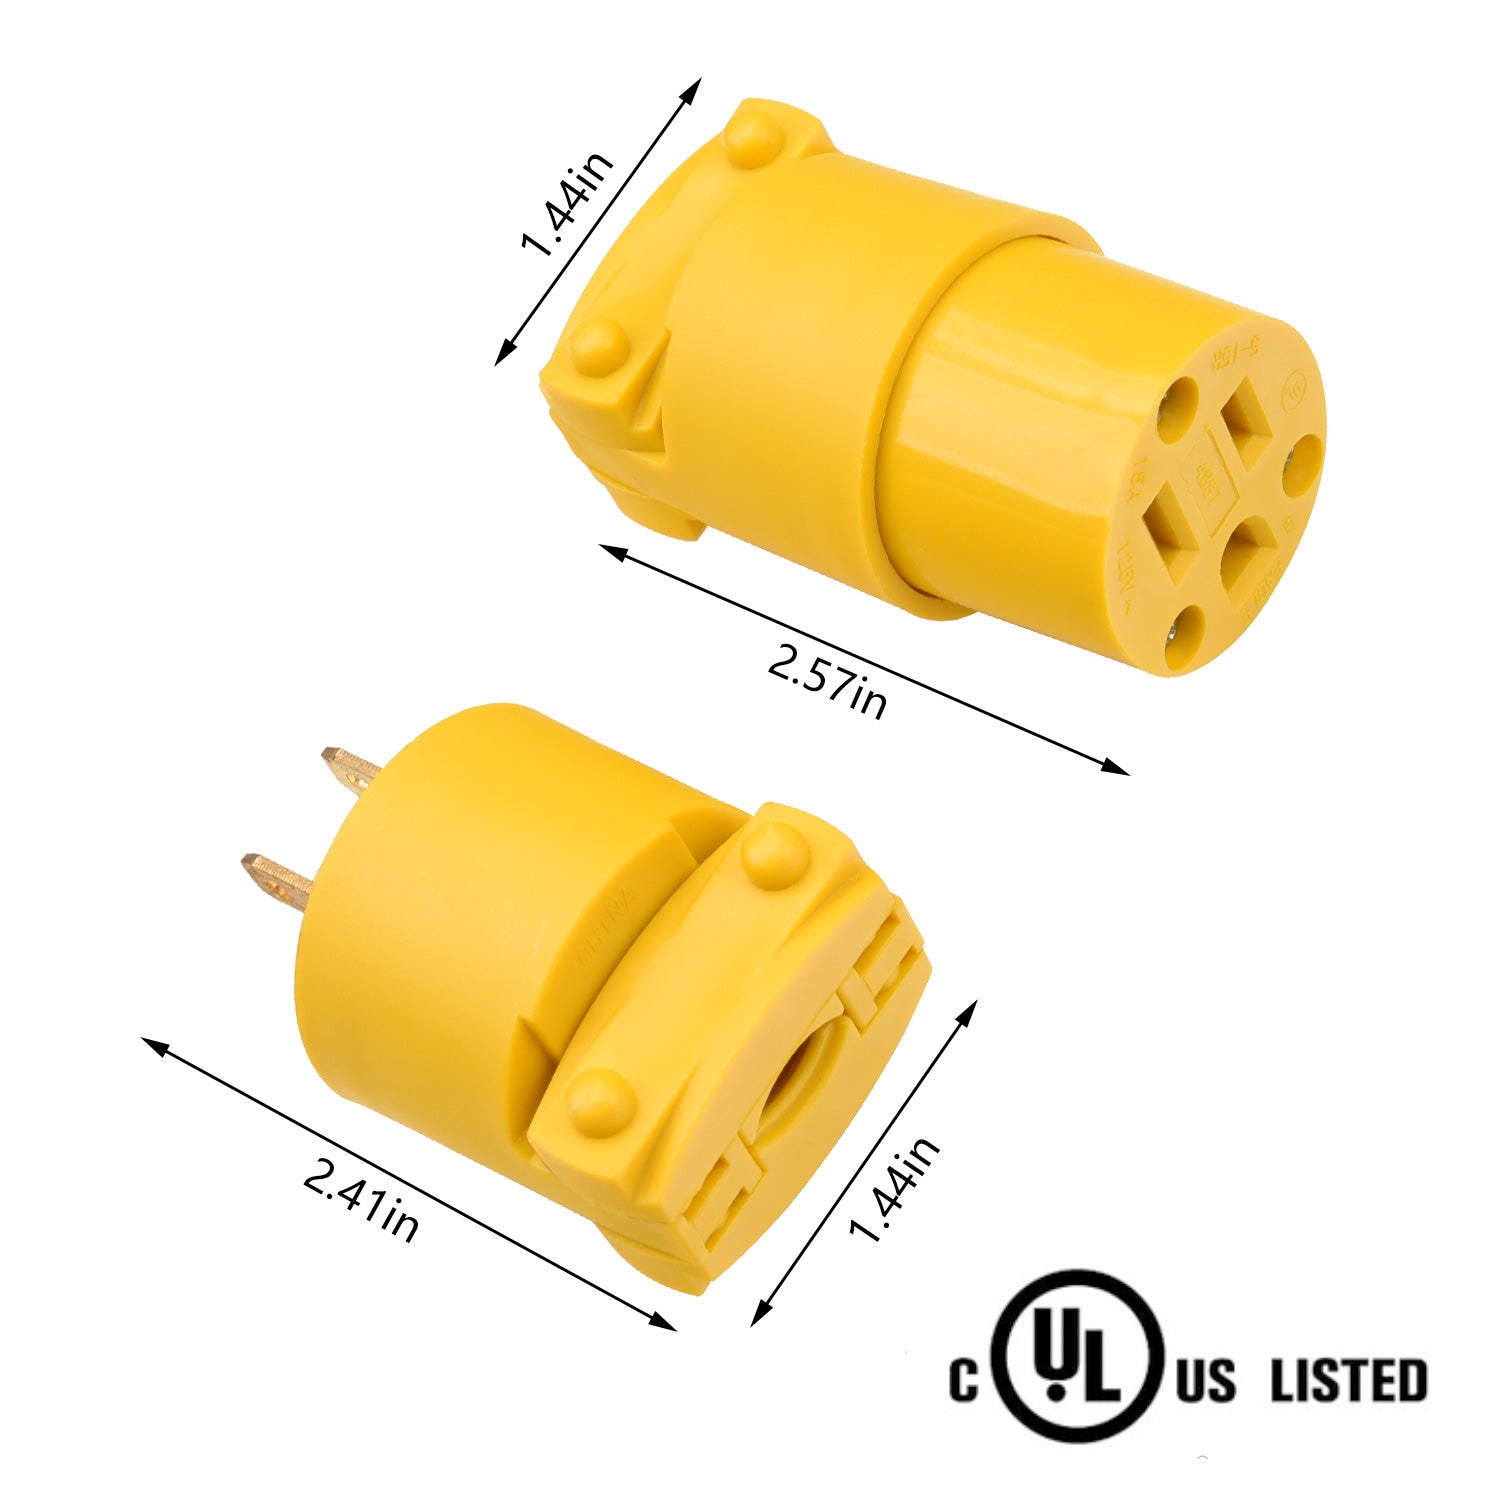 STARELO 10PCS Electrical Replacement Plug Extension Cord Ends Yellow Shell 125V 15A 2Pole 3Wire NEMA 5-15P 3-Prong Straight Blade Grounding Type UL Listed(Male).